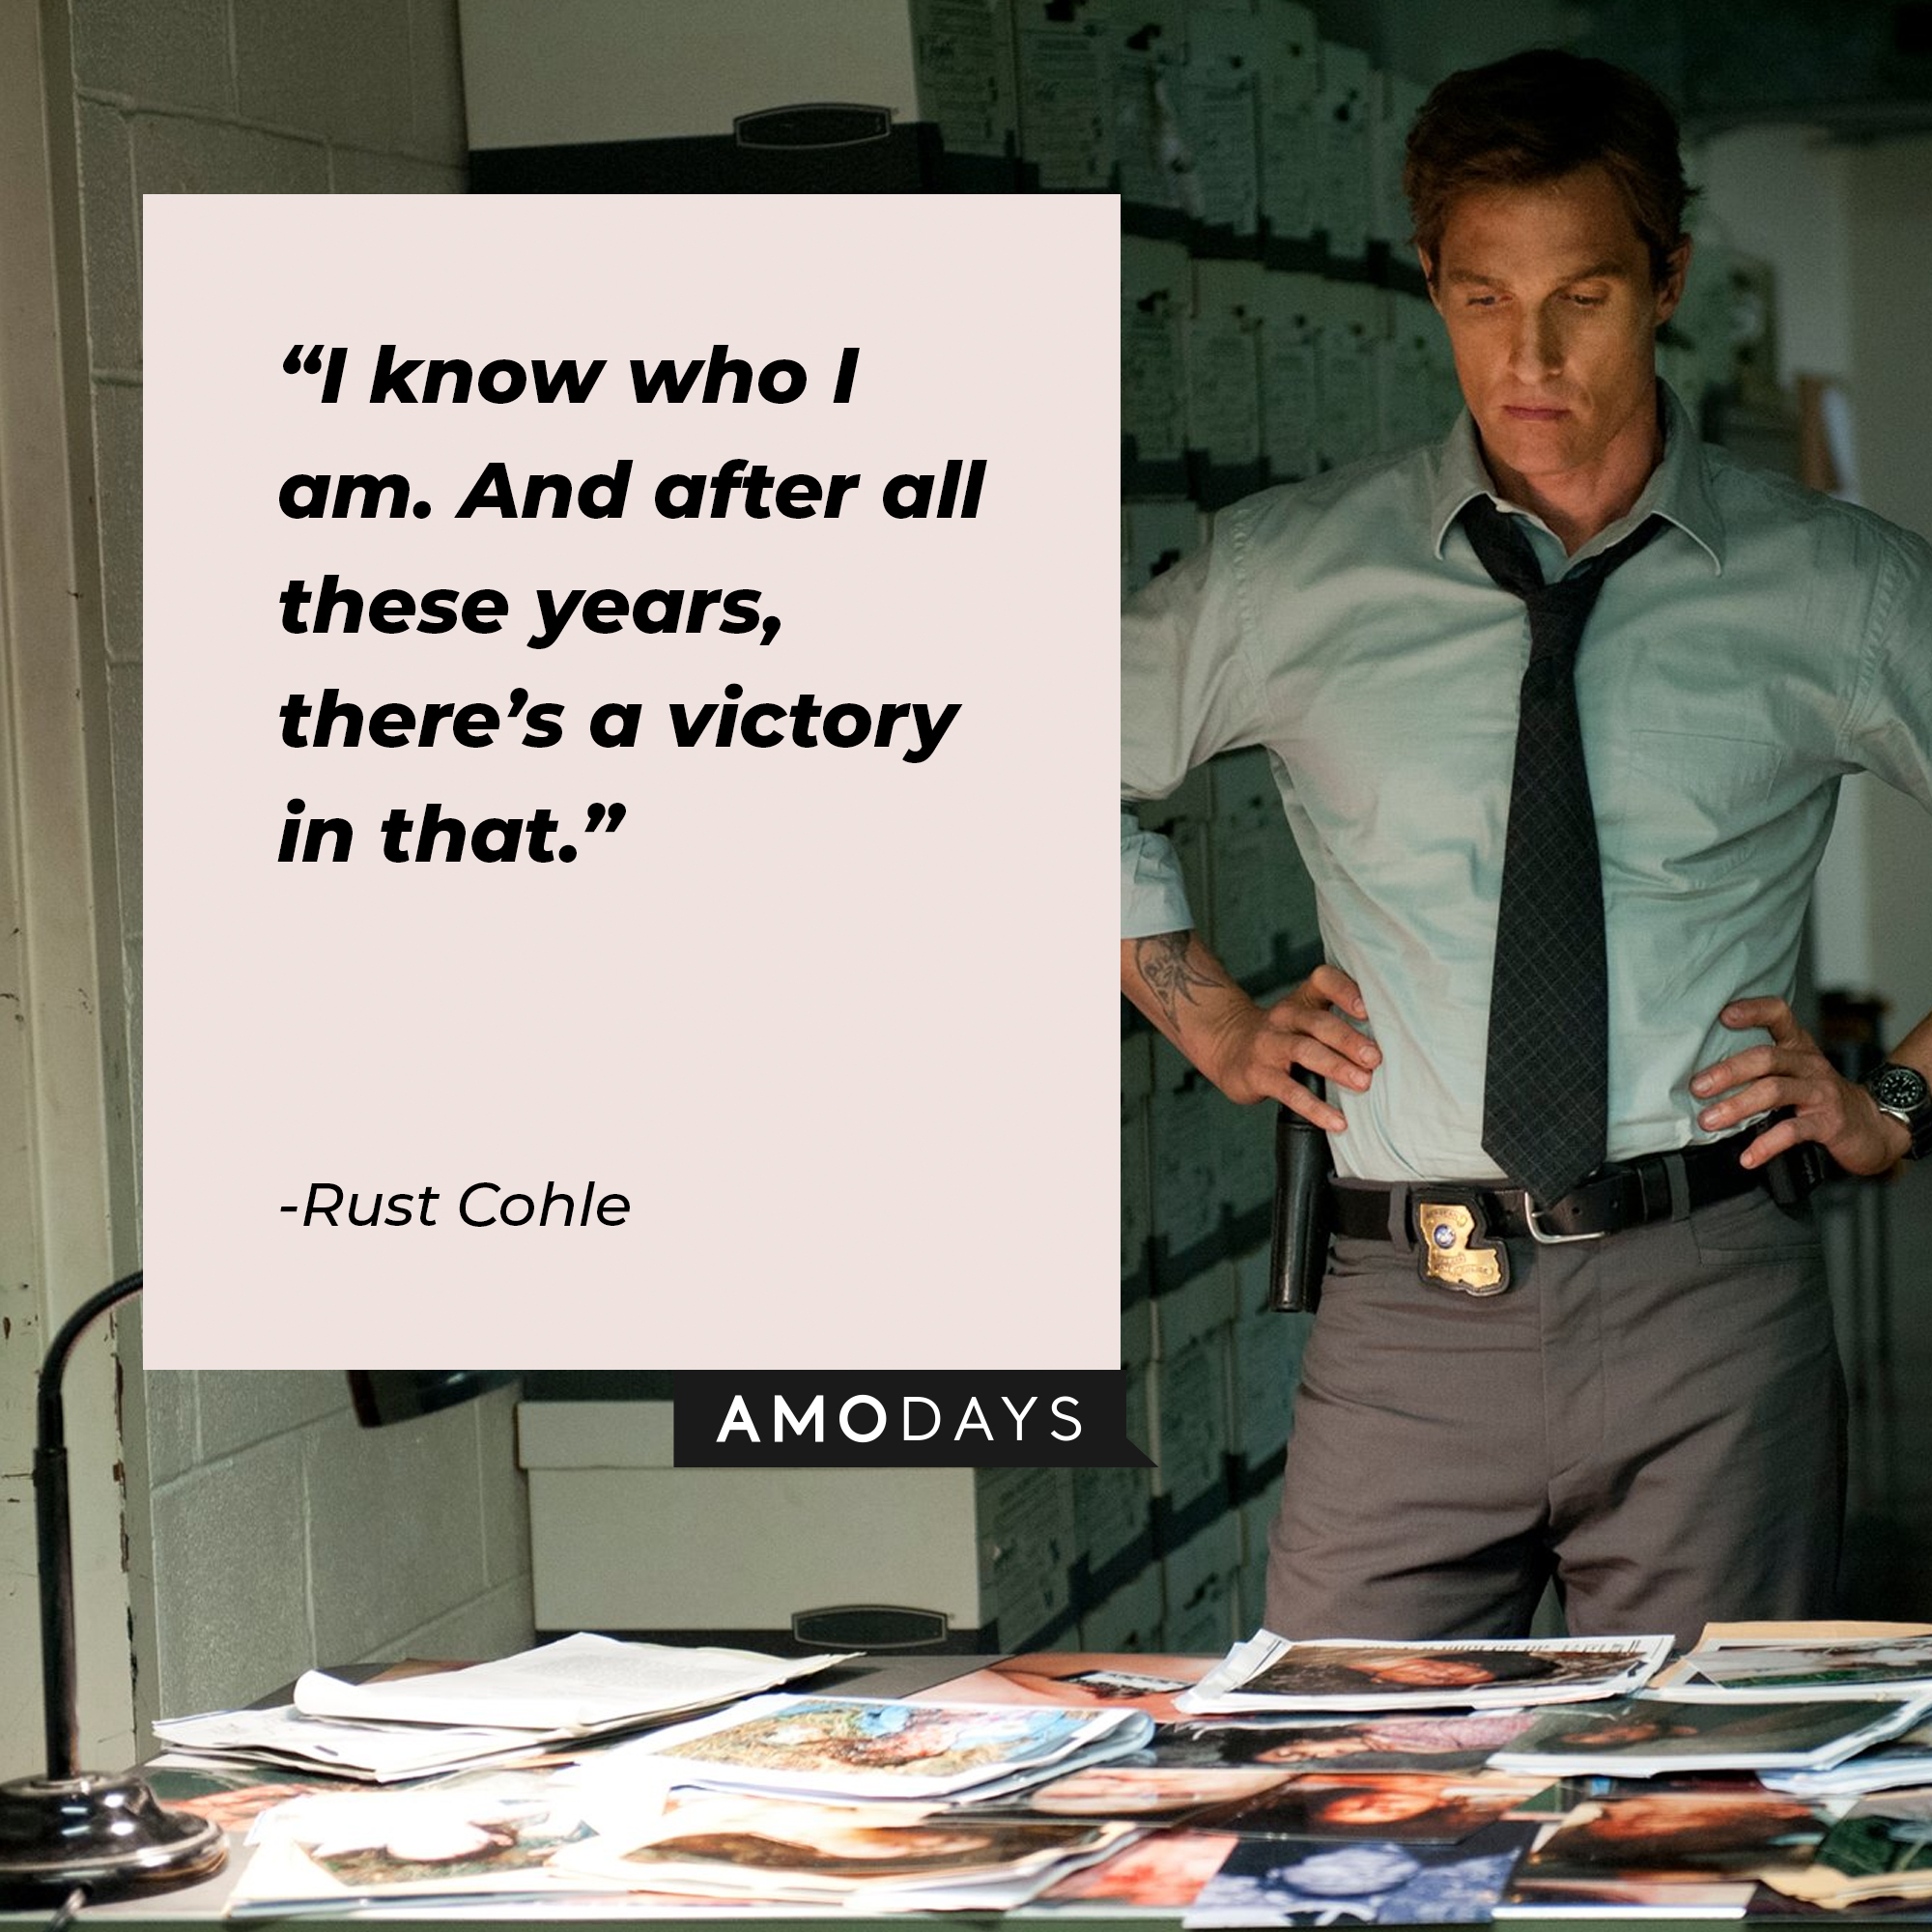 A photo of Rust Cohle with the quote, "I know who I am. And after all these years, there’s a victory in that." | Source: Facebokk/TrueDetective